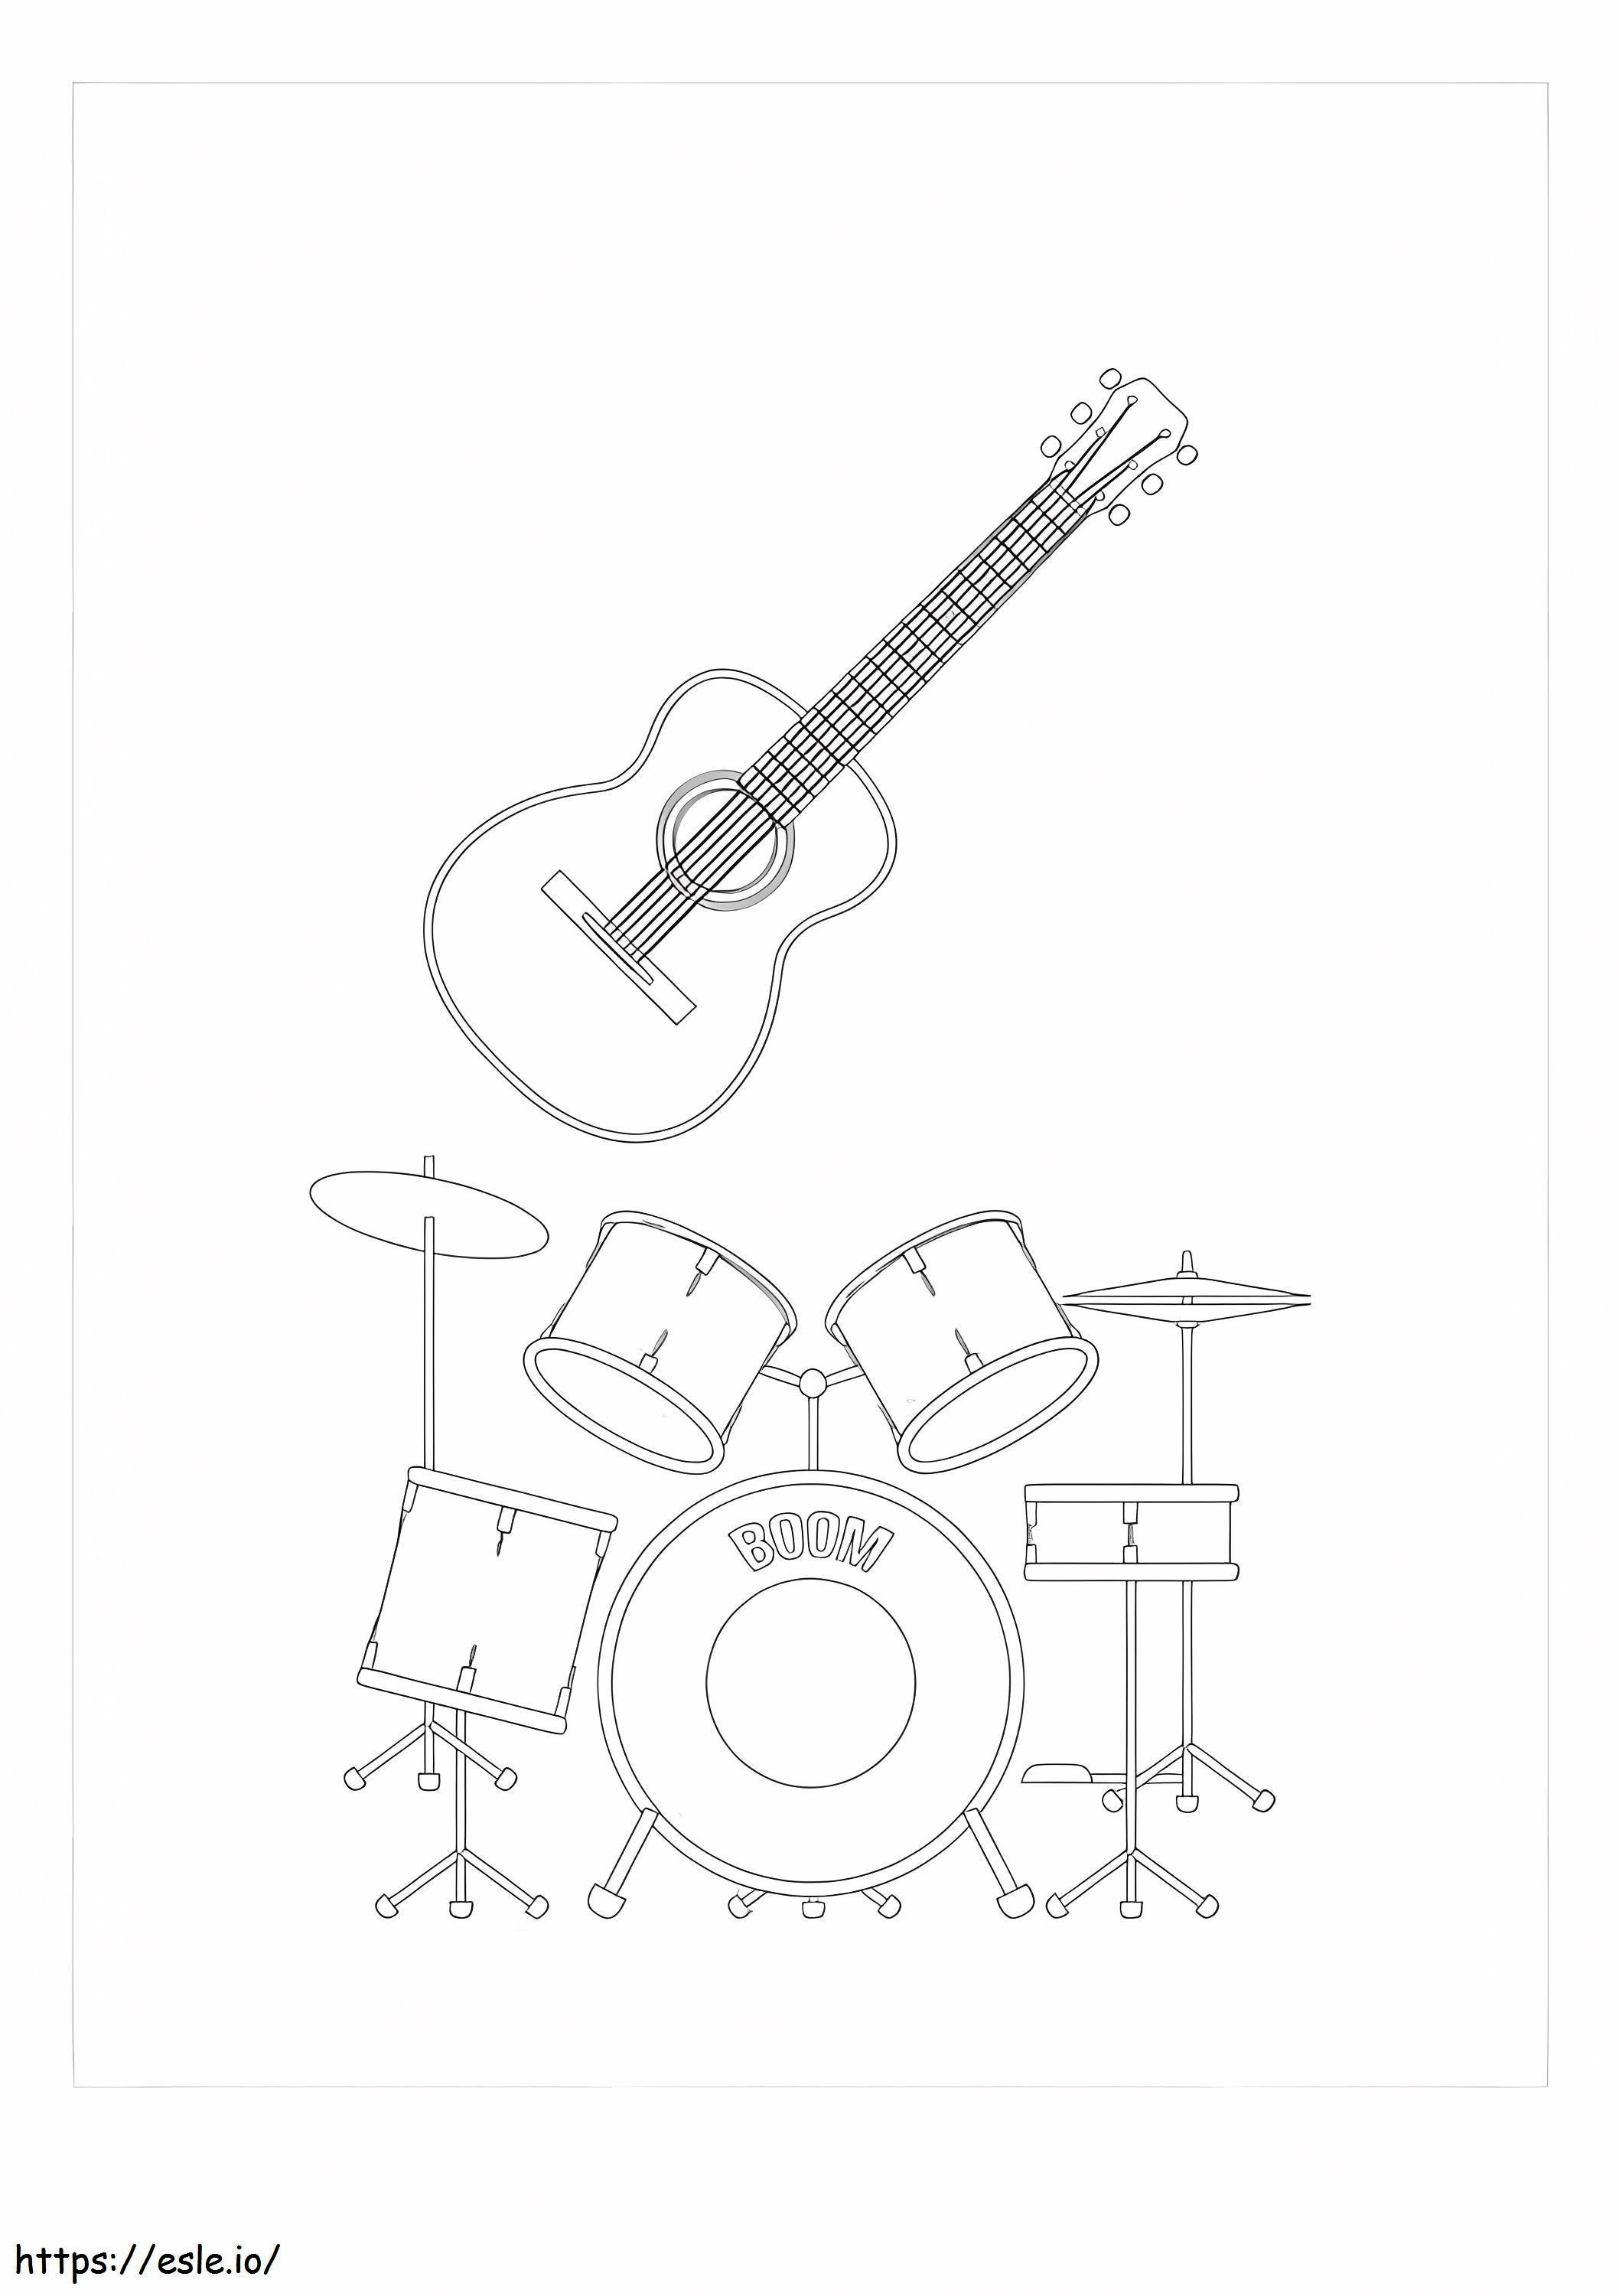 Guitar And Drum Set coloring page